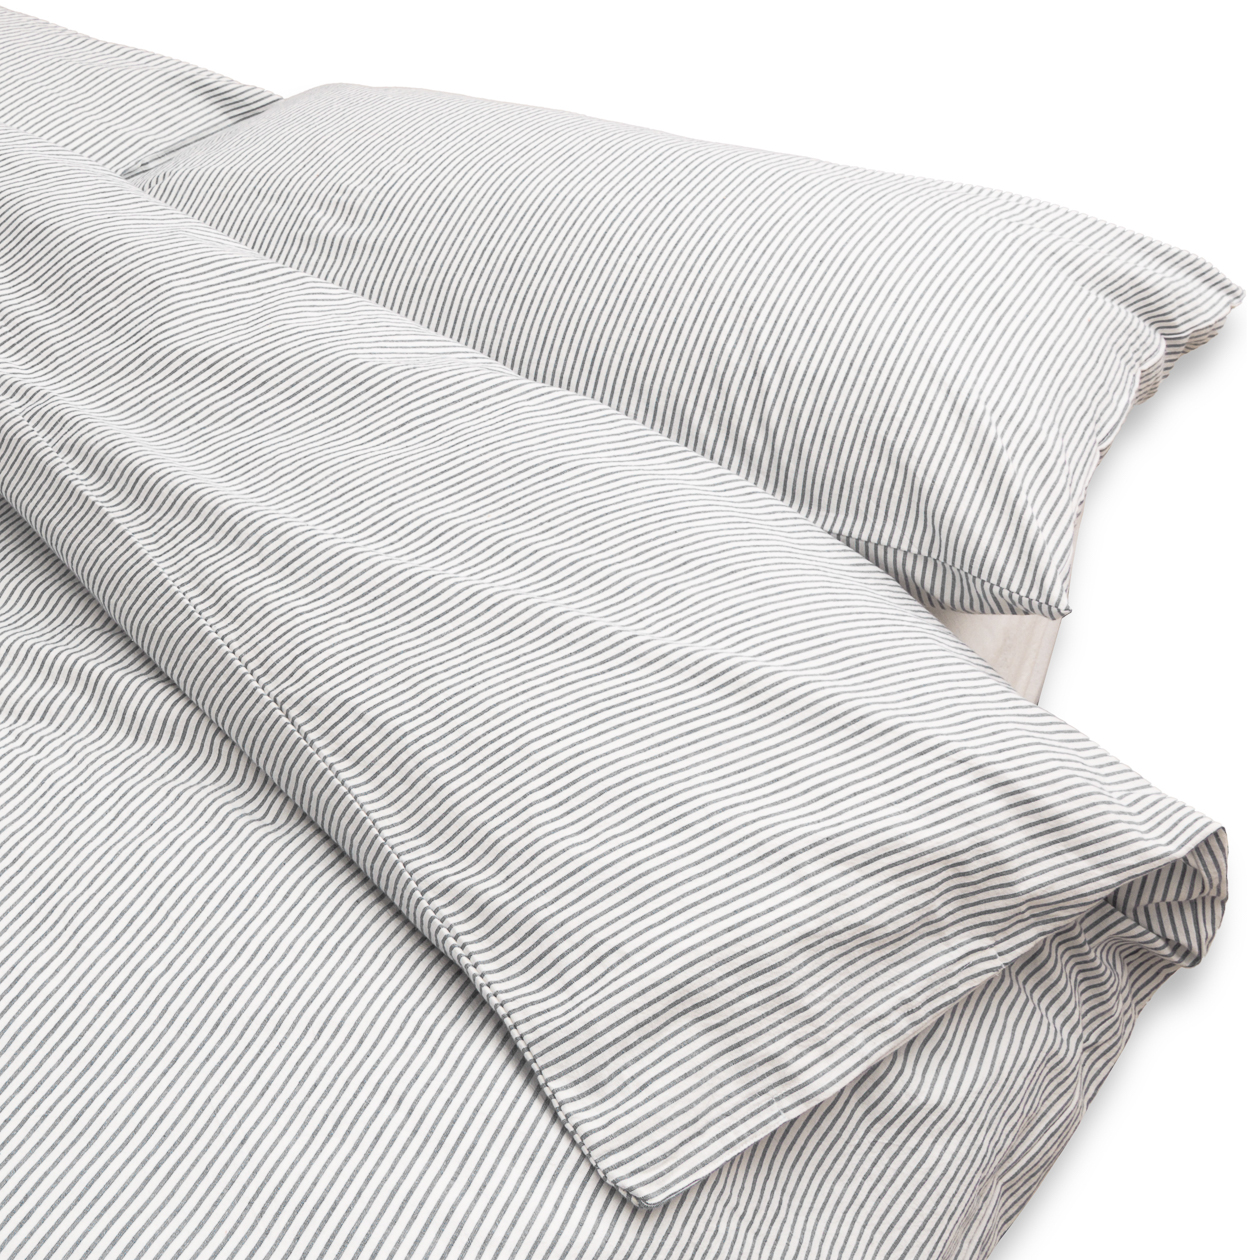 Washed Cotton Duvet Cover- Queen